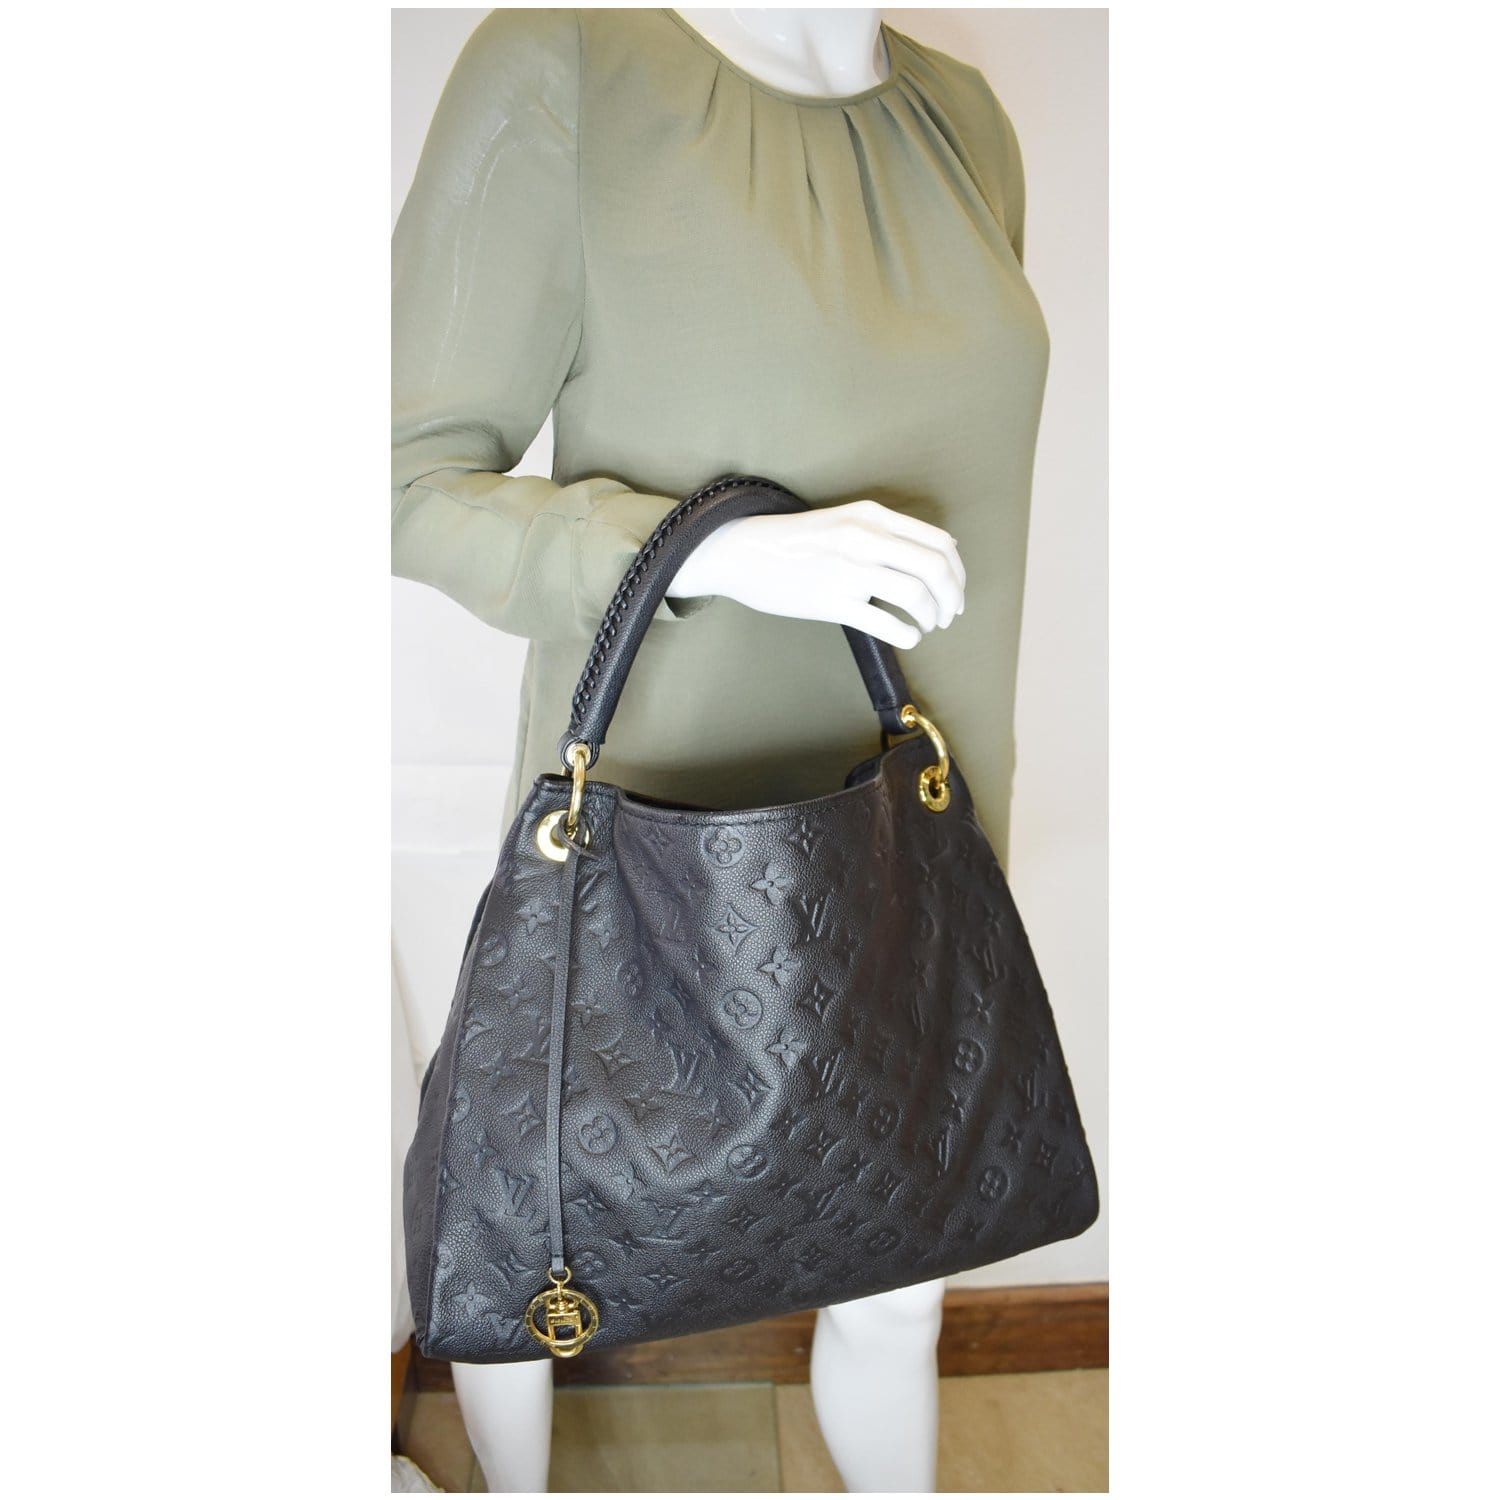 Discover Timeless Elegance: Louis Vuitton Artsy mm at Dress Raleigh